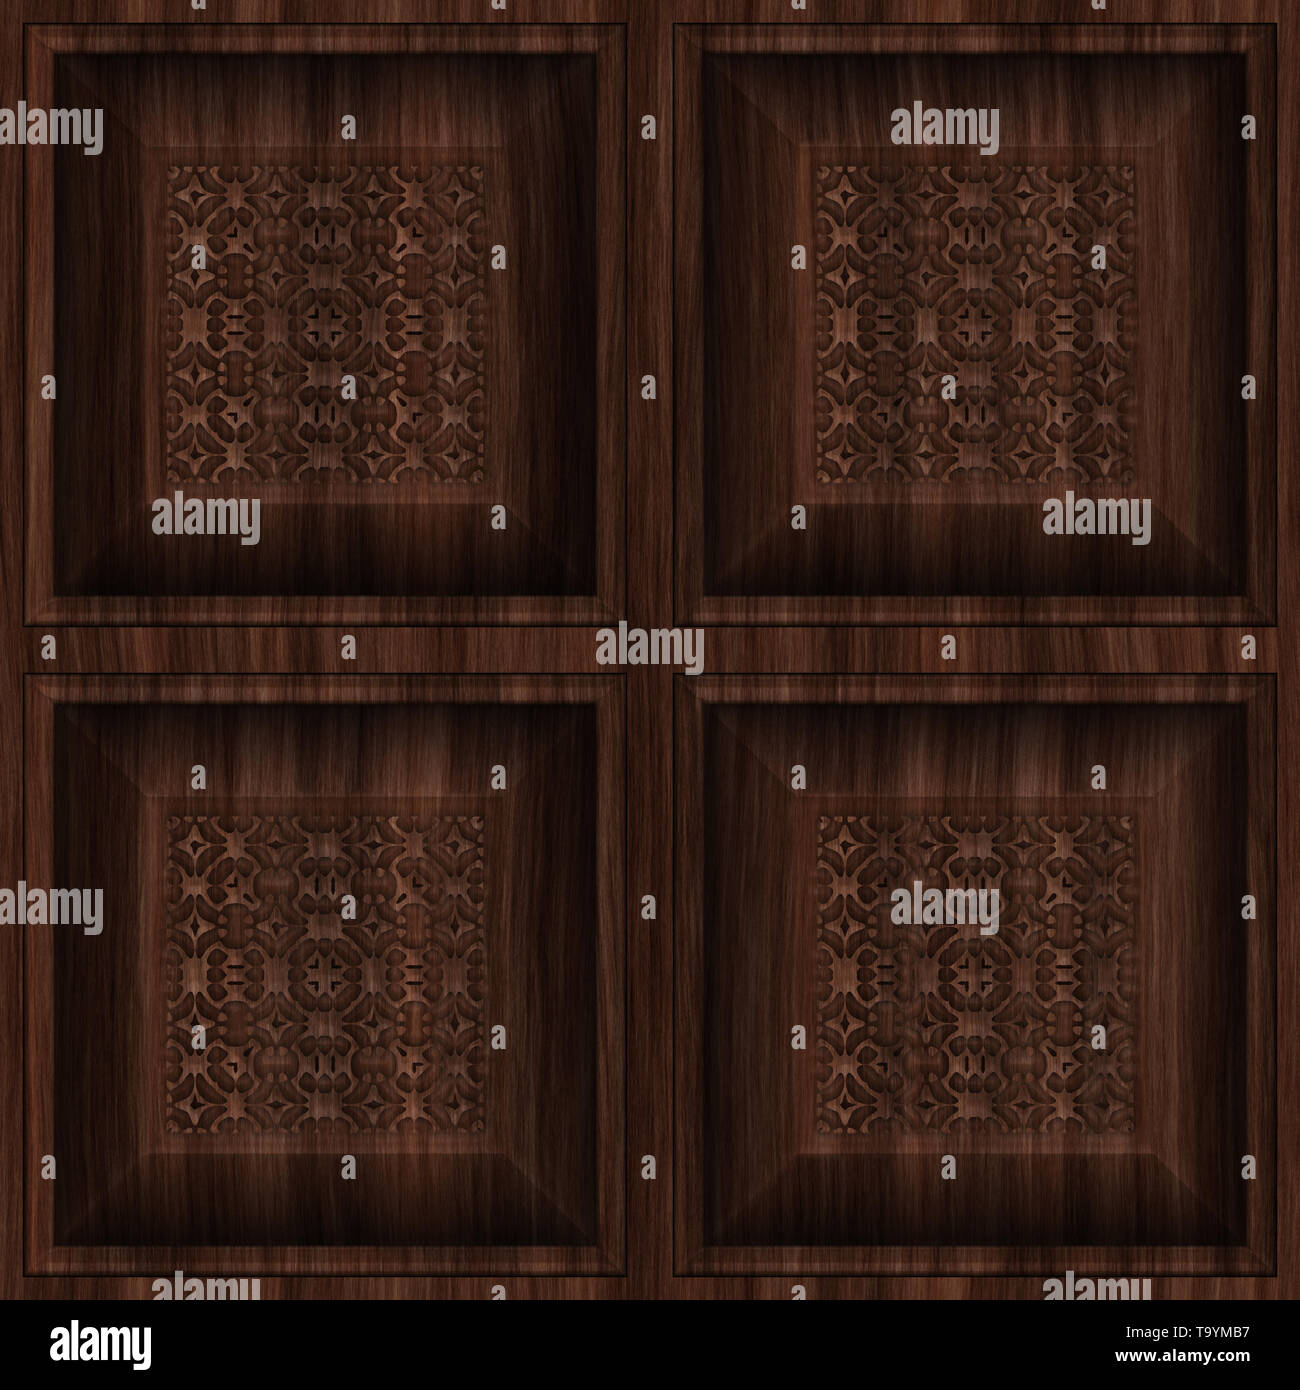 Carved Wood Seamless Texture Tile Stock Photo